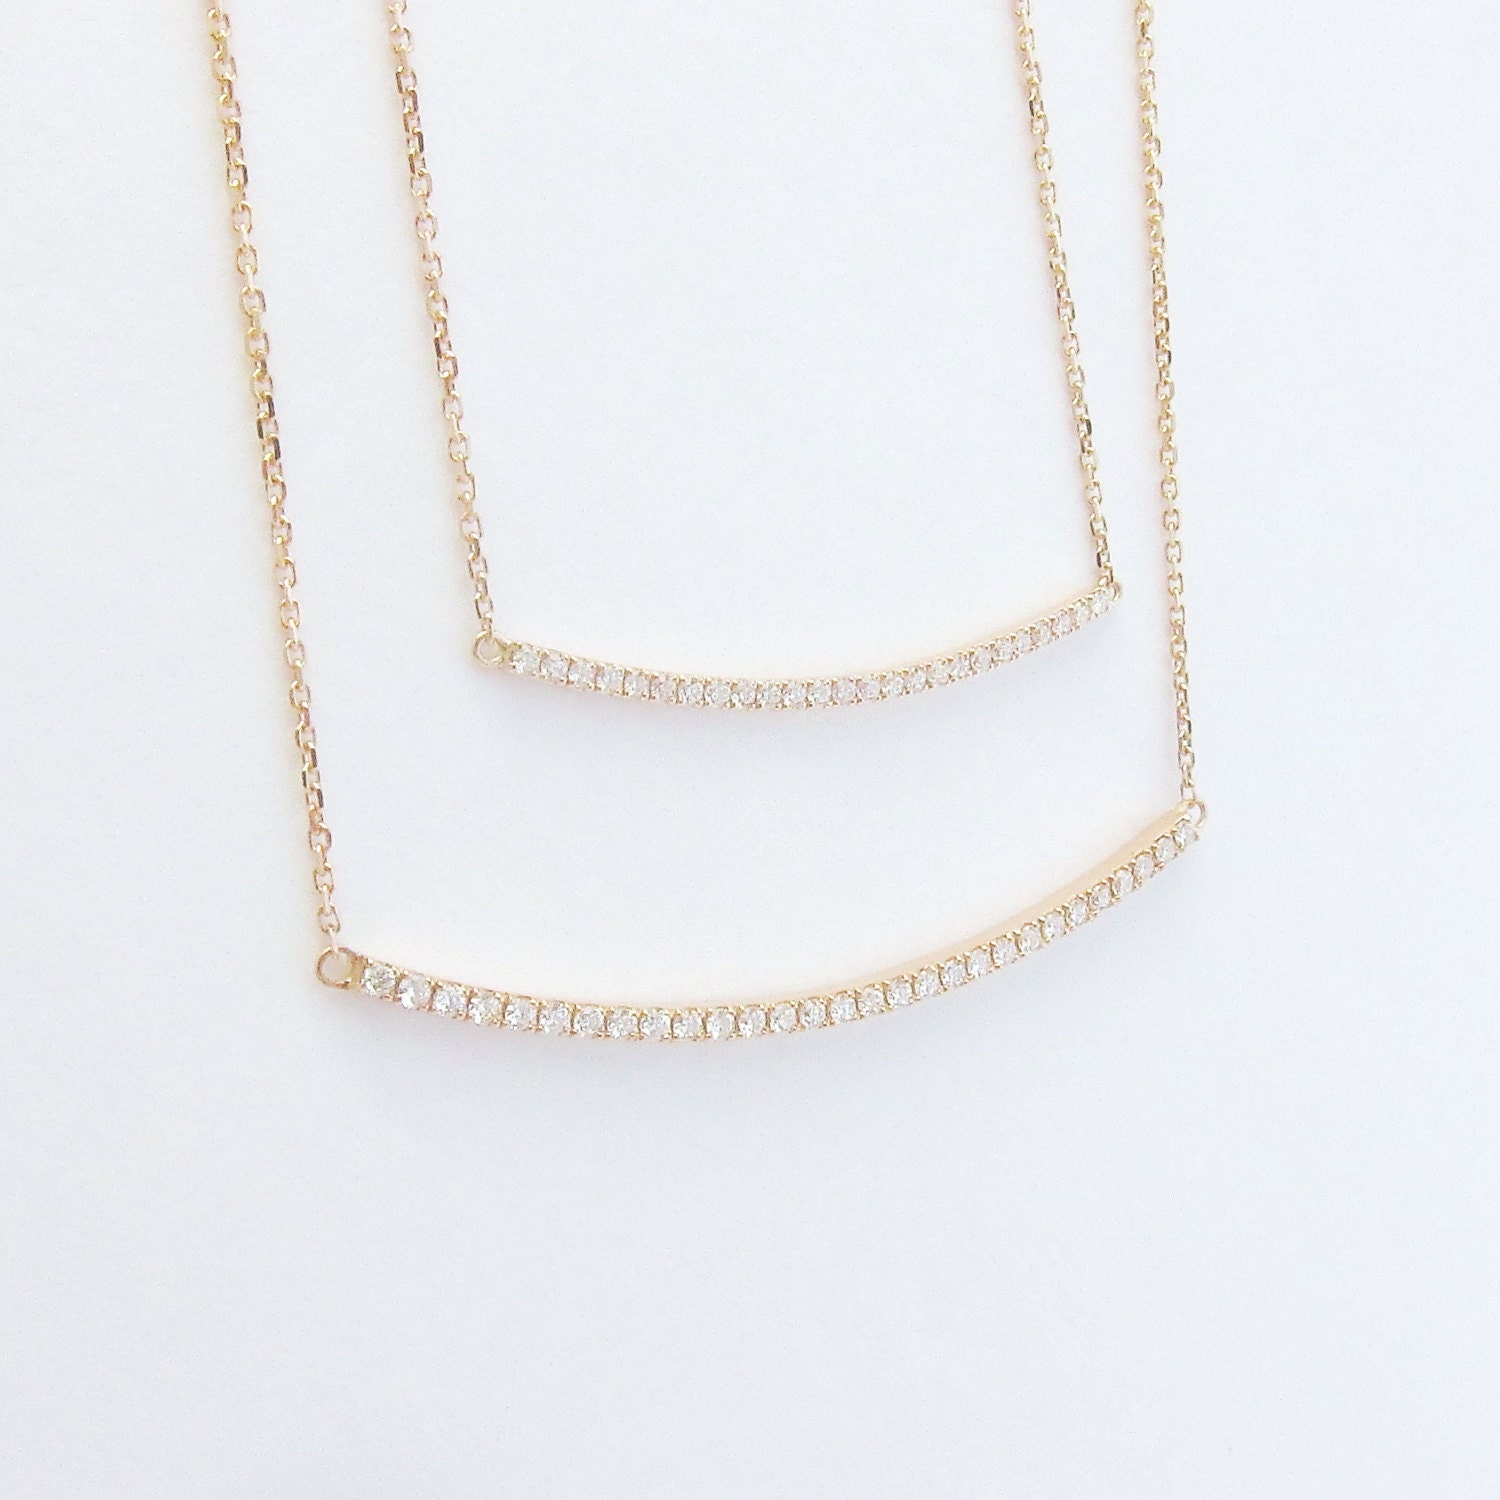 Diamond Curved Bar Necklace // 1.3 Size // 14k Yellow - Etsy